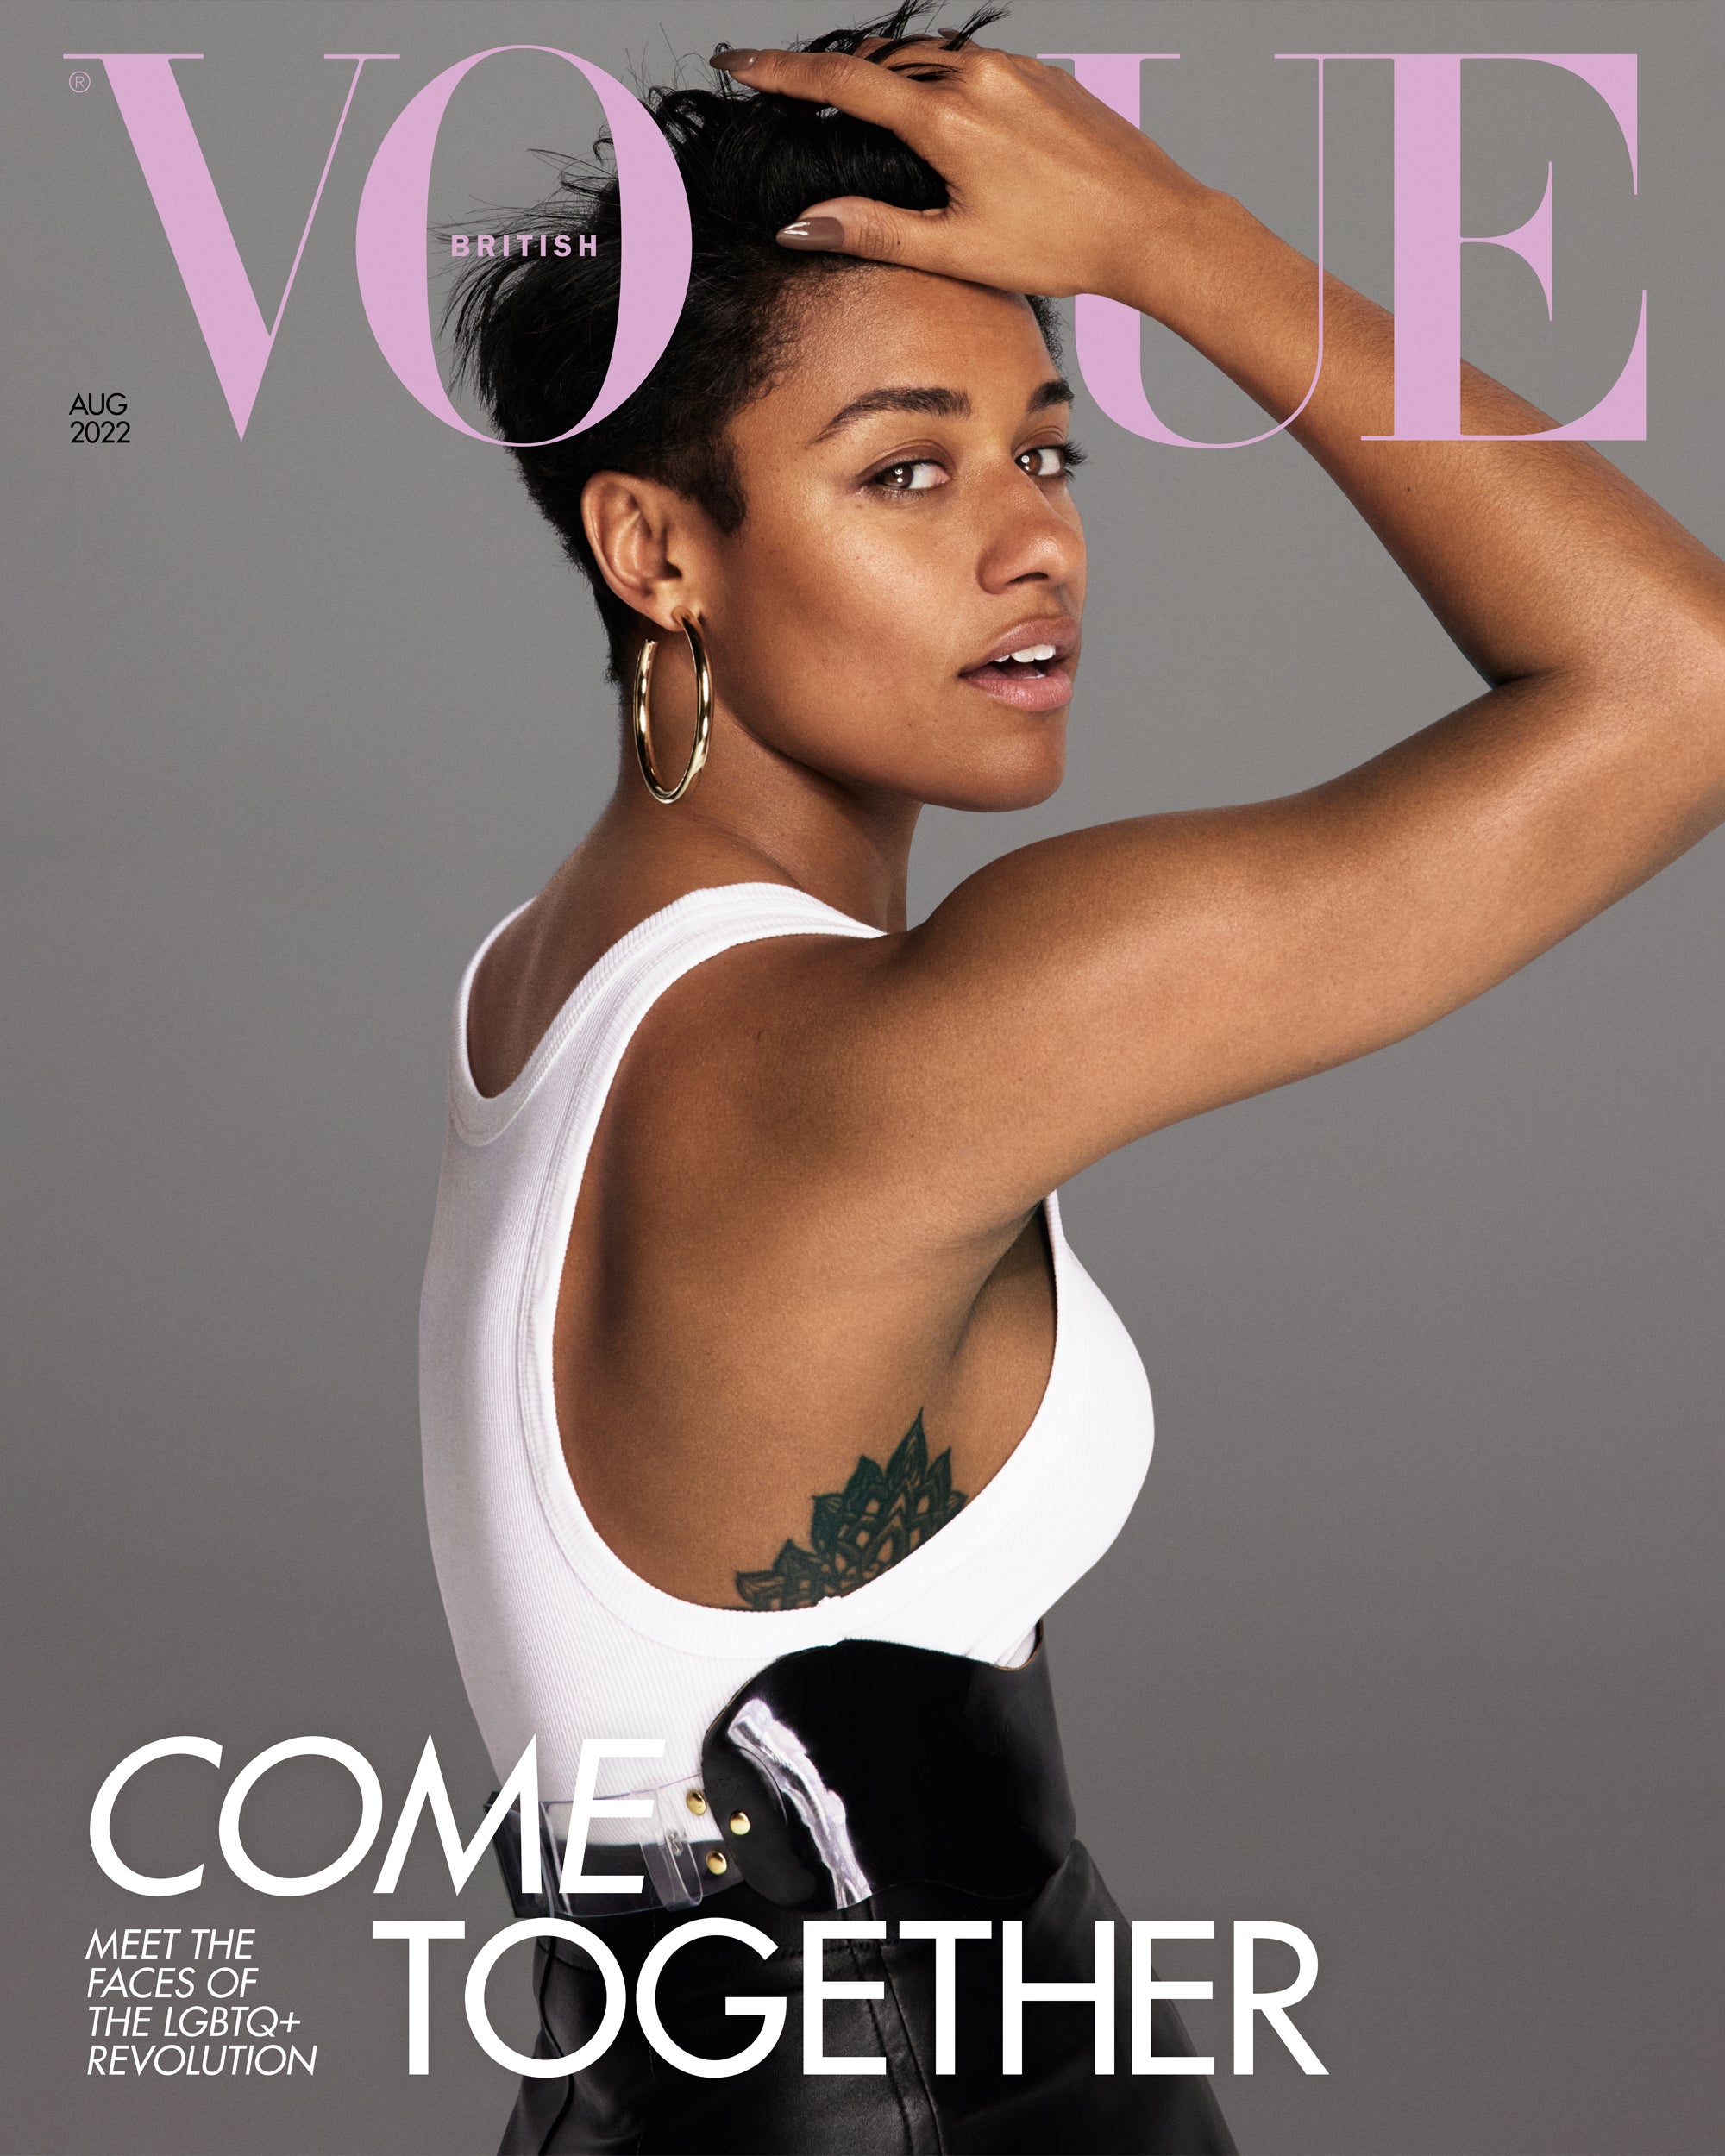 Ariana DeBose on the cover of British Vogue’s August 2022 edition